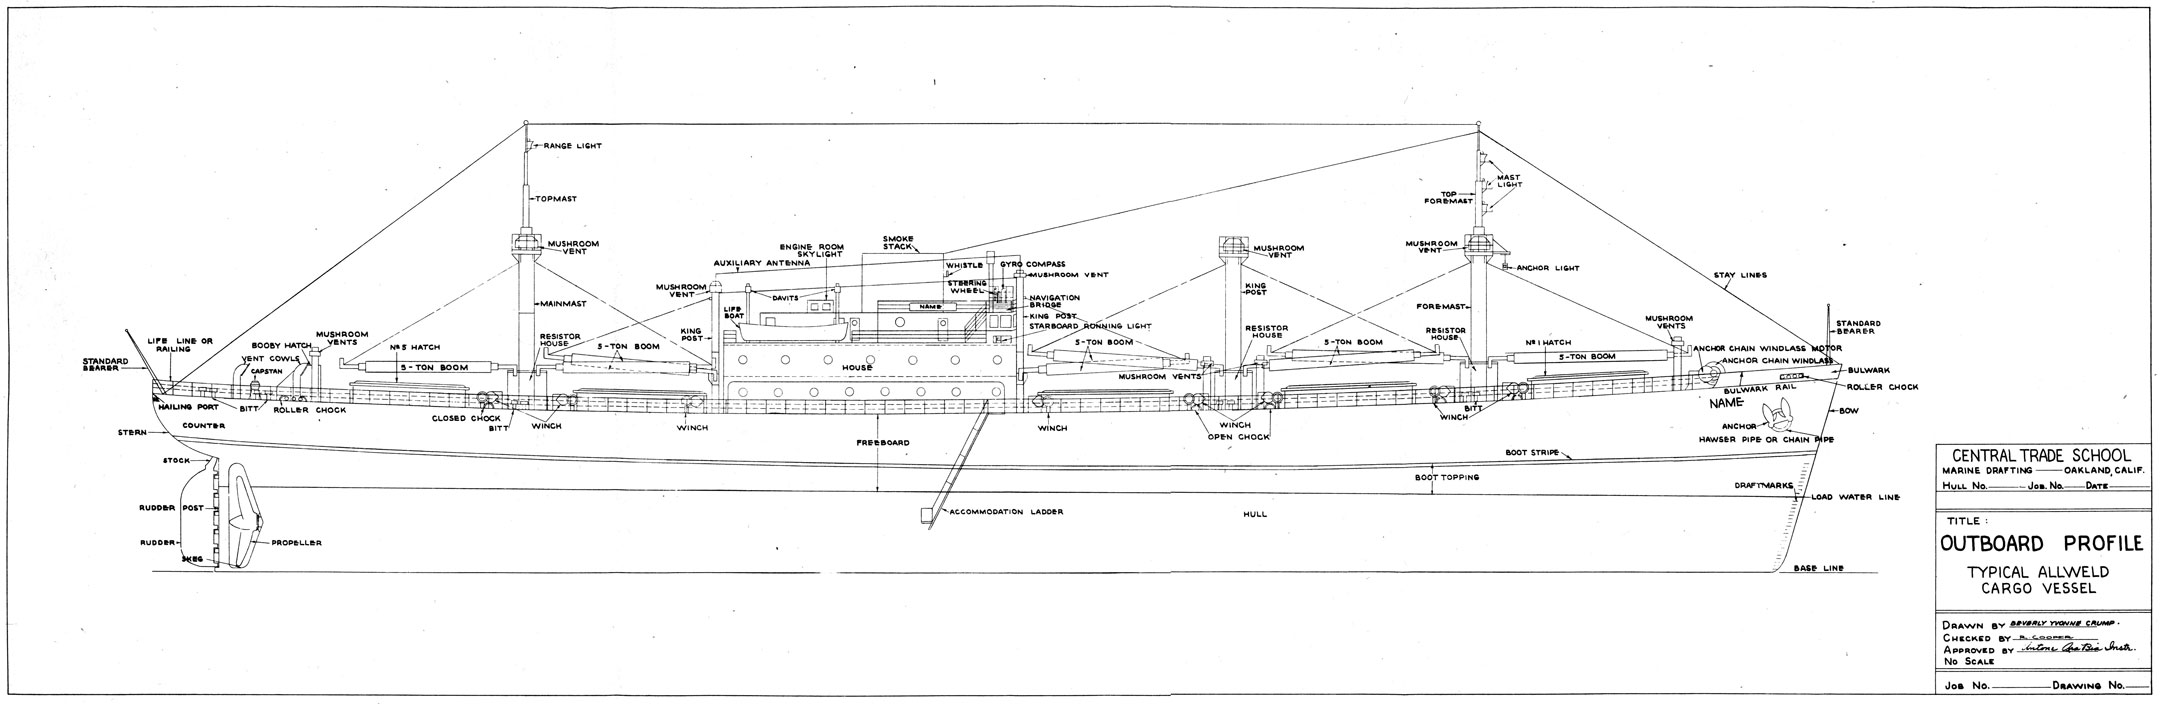 CENTRAL TRADE SCHOOL
MARINE DRAFTING - OAKLAND CALIF.
HULL No. - Job. No. - DATE -
TITLE
OUTBOARD PROFILE
TYPICAL ALLWELD
CARGO VESSEL
DRAWN BY BEVERLY YVONNE CRUMP.
CHECKED BY R. COOPER
APPROVED BY Antone AraBia Instr.
NO SCALE
Joe No - DRAWING No. -
